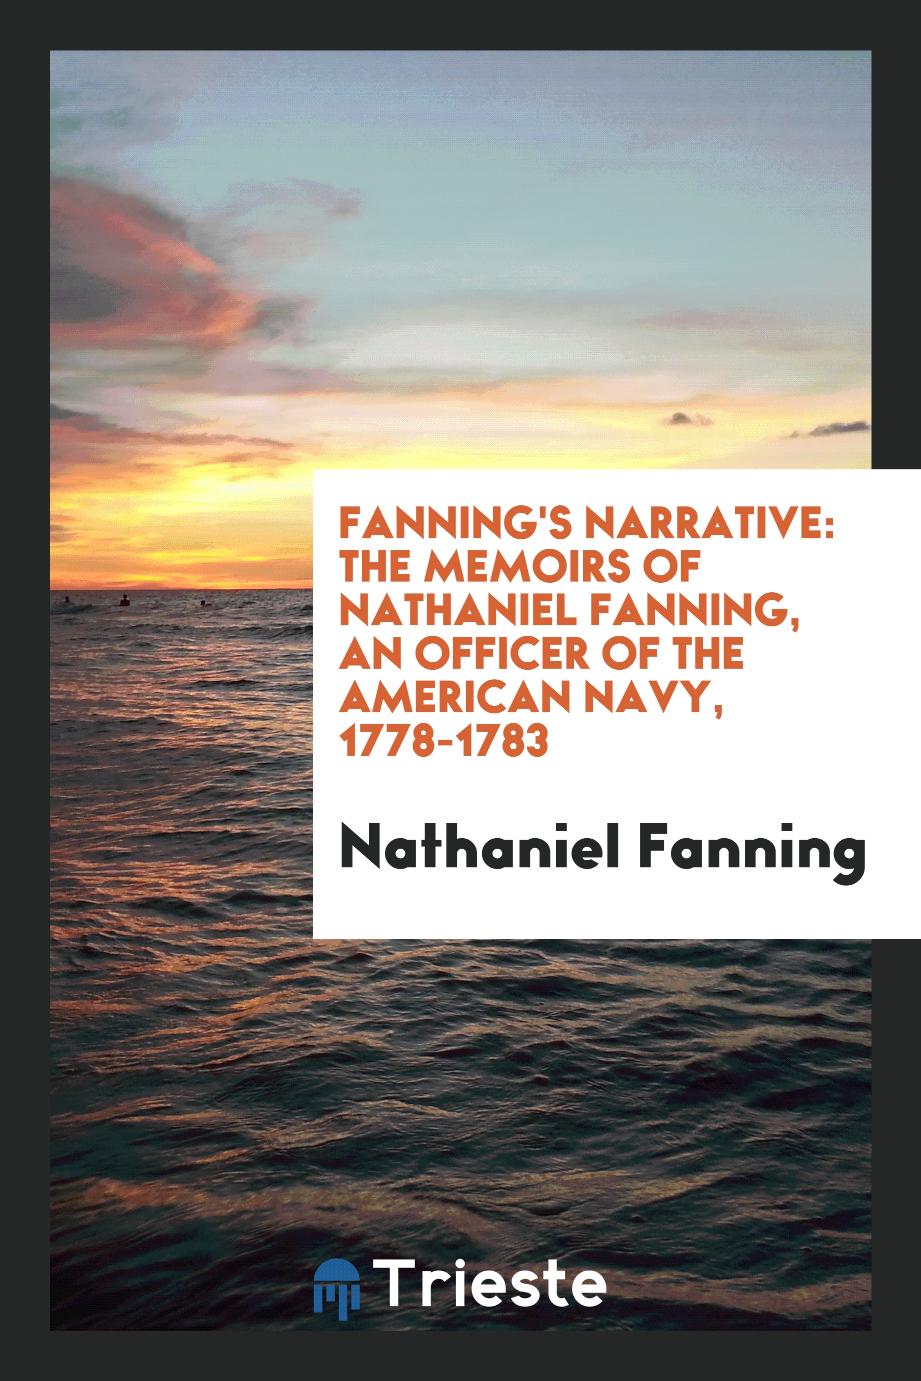 Fanning's narrative: the memoirs of Nathaniel Fanning, an officer of the American navy, 1778-1783